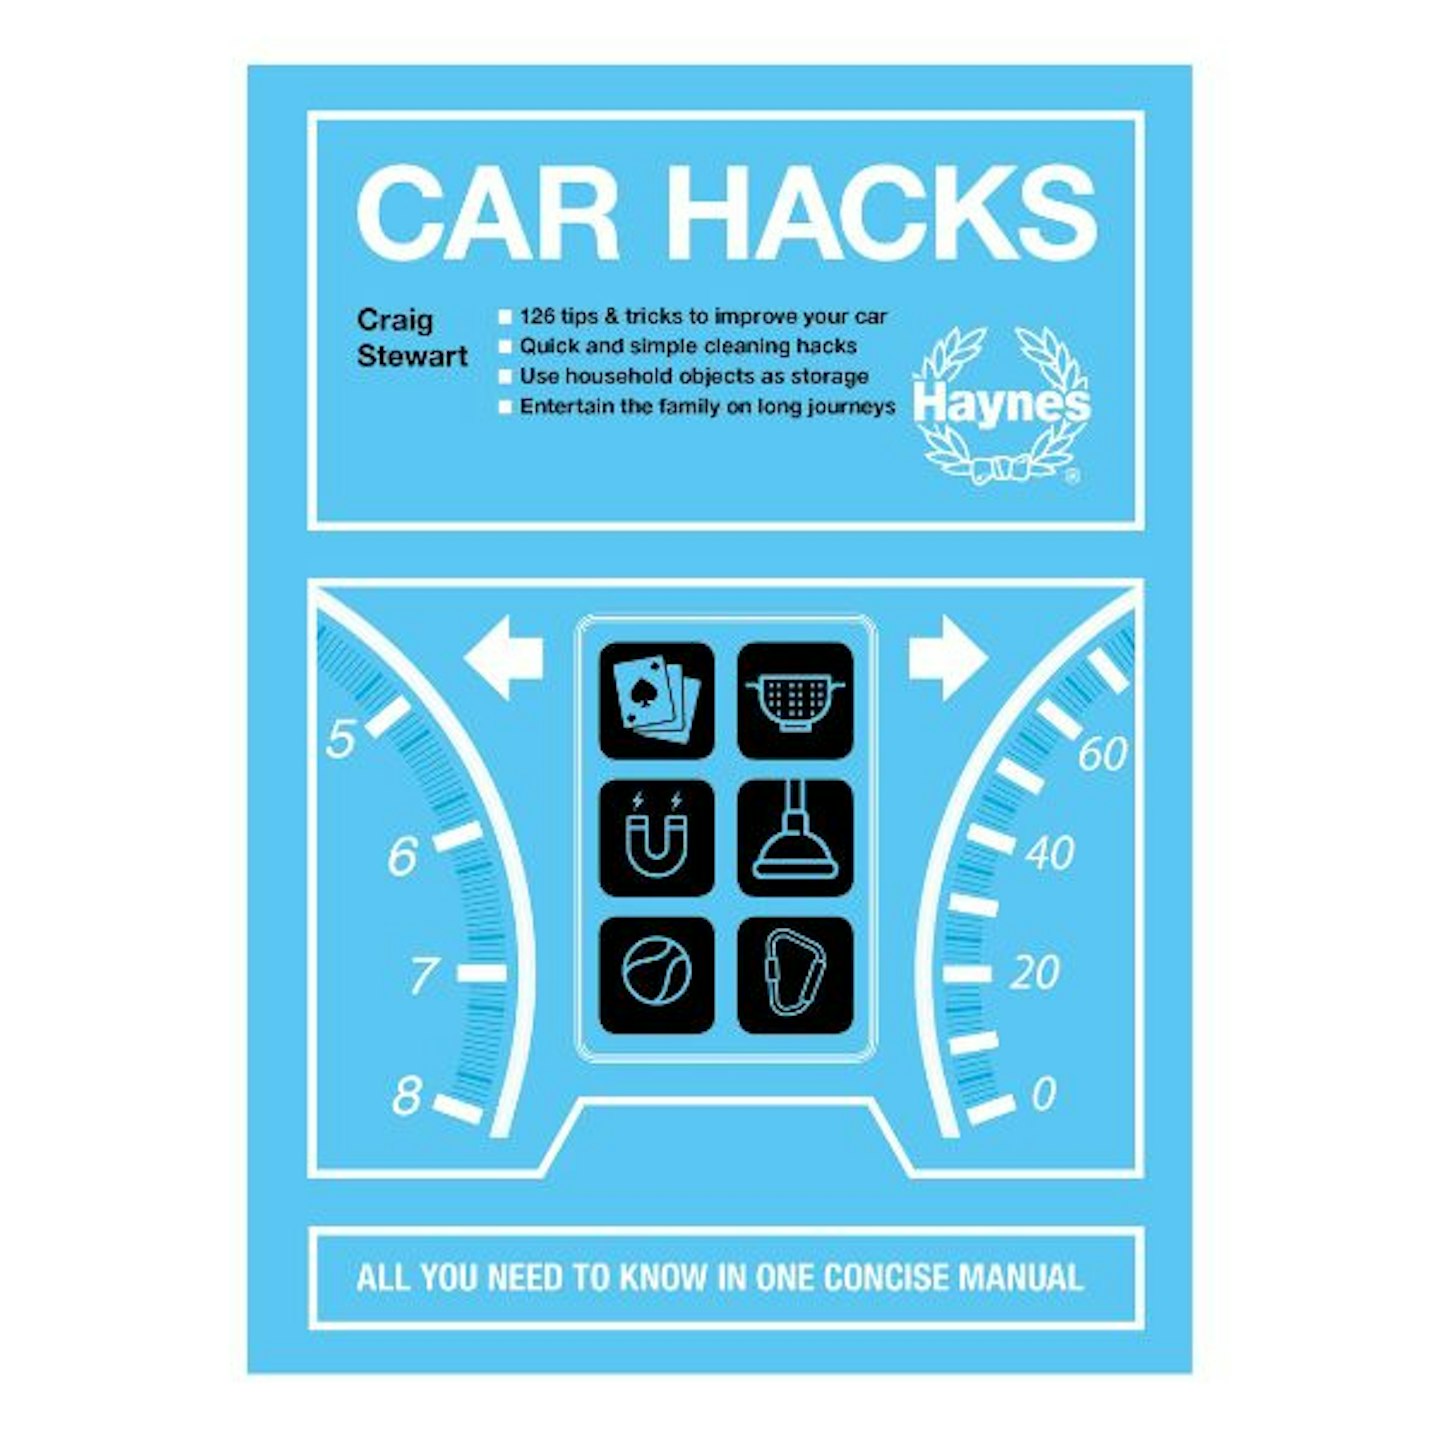 Car Hacks: All you need to know in one concise manual